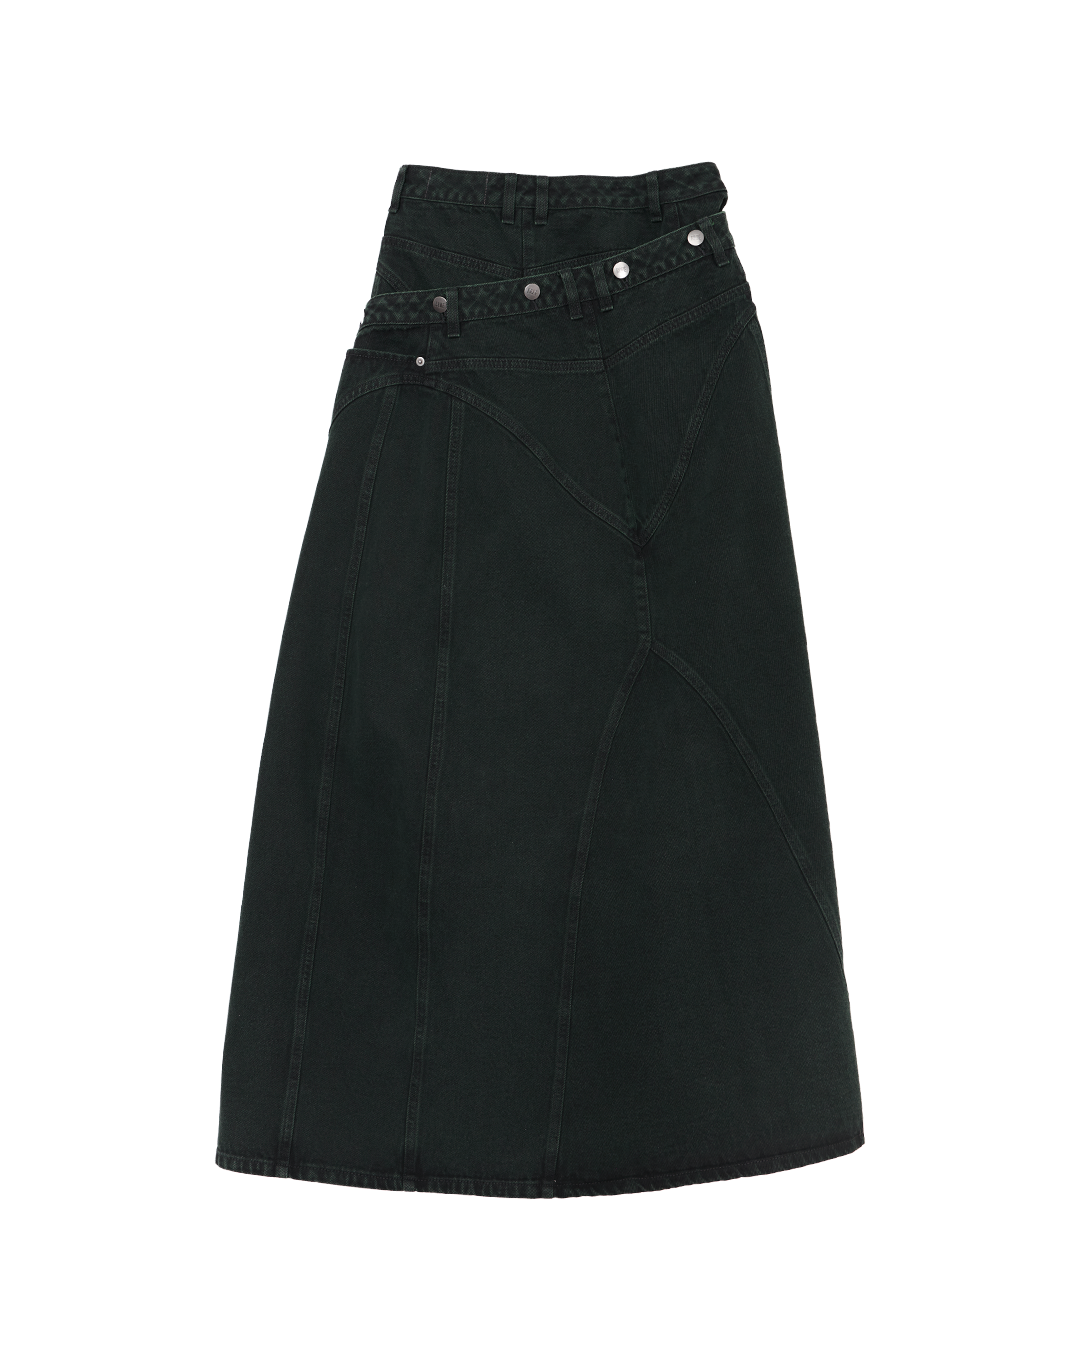 KAHE - The Delivery Skirt - Green With Envy